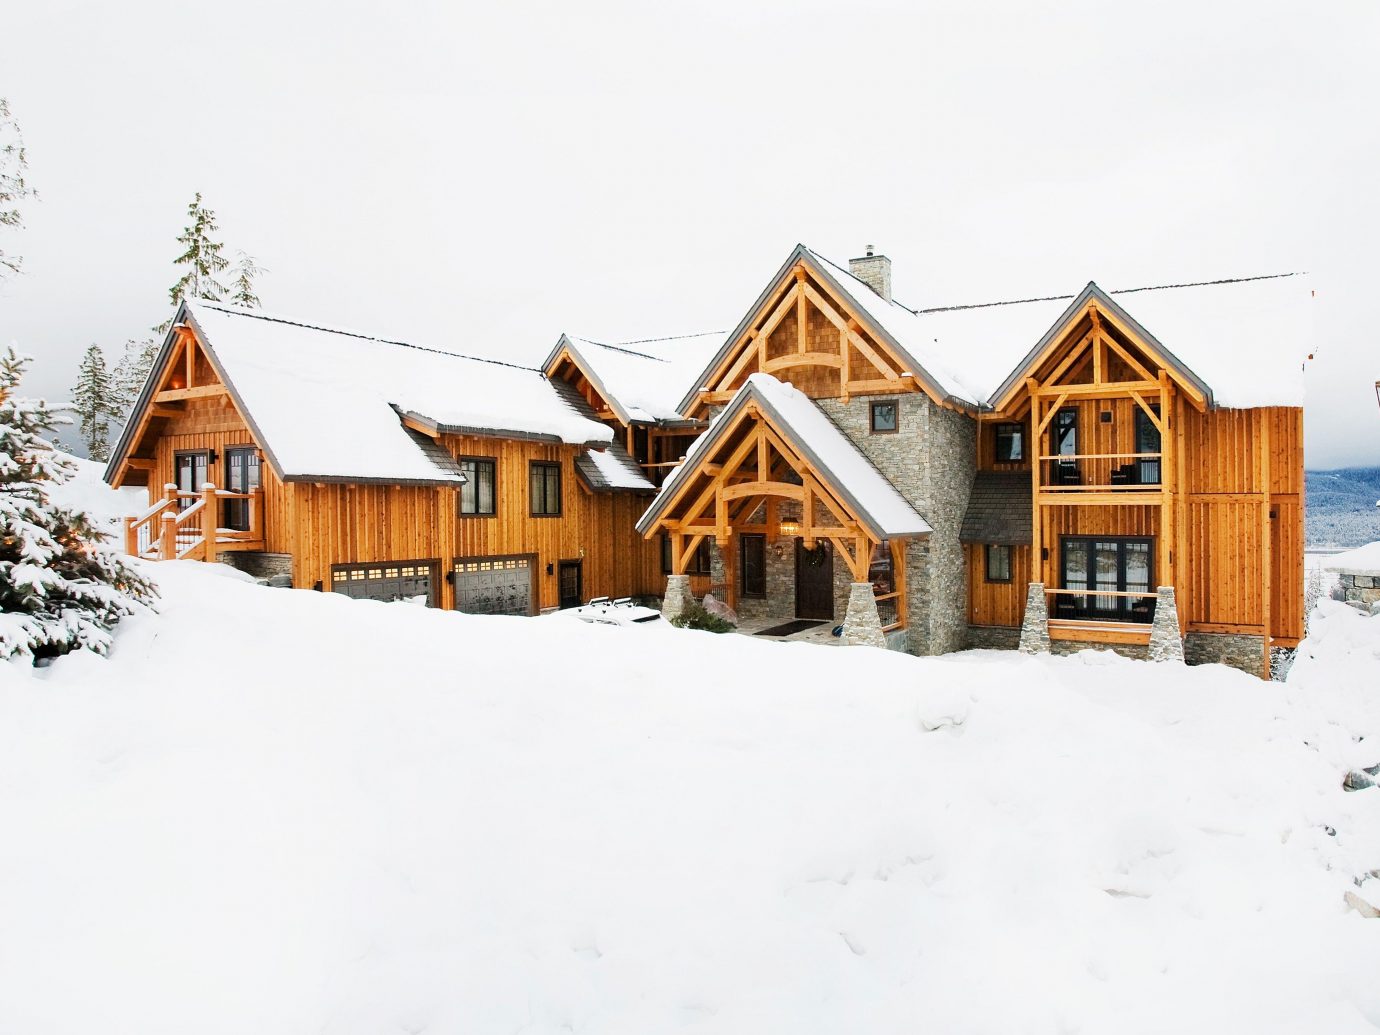 Hotels Luxury Travel Mountains + Skiing Trip Ideas snow outdoor sky Winter weather house building Town season geological phenomenon home residential area neighbourhood blizzard Village sugar house farm building barn